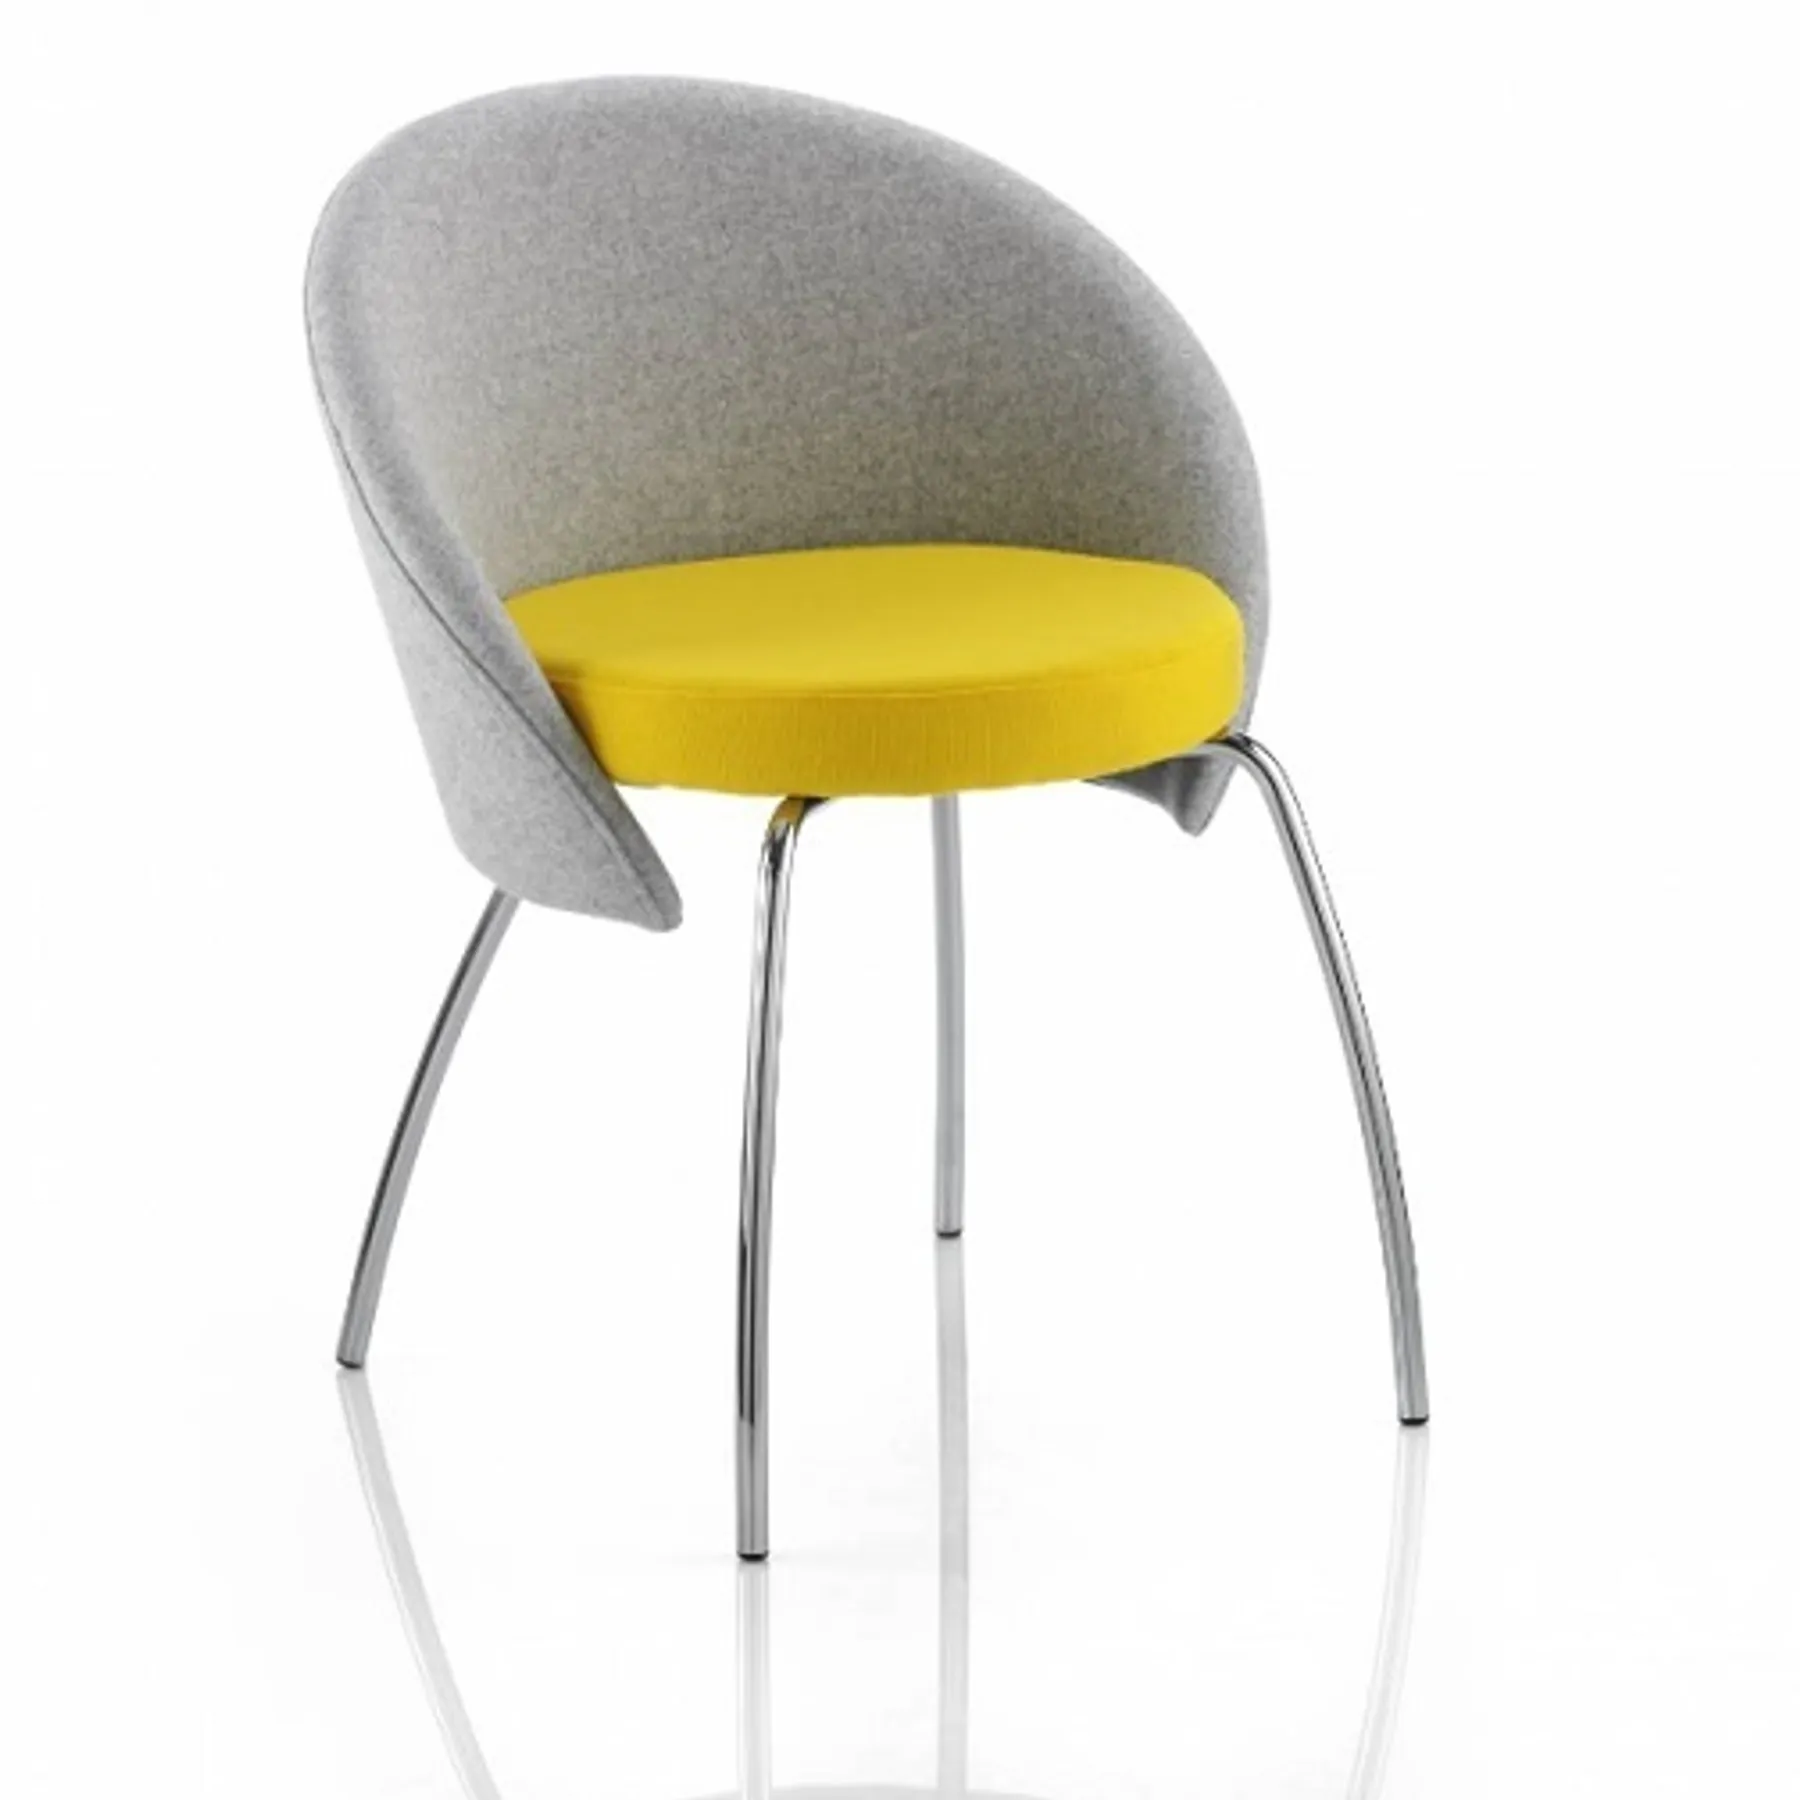 Lof Direct Giggle Chair ocee design venus front angled legs